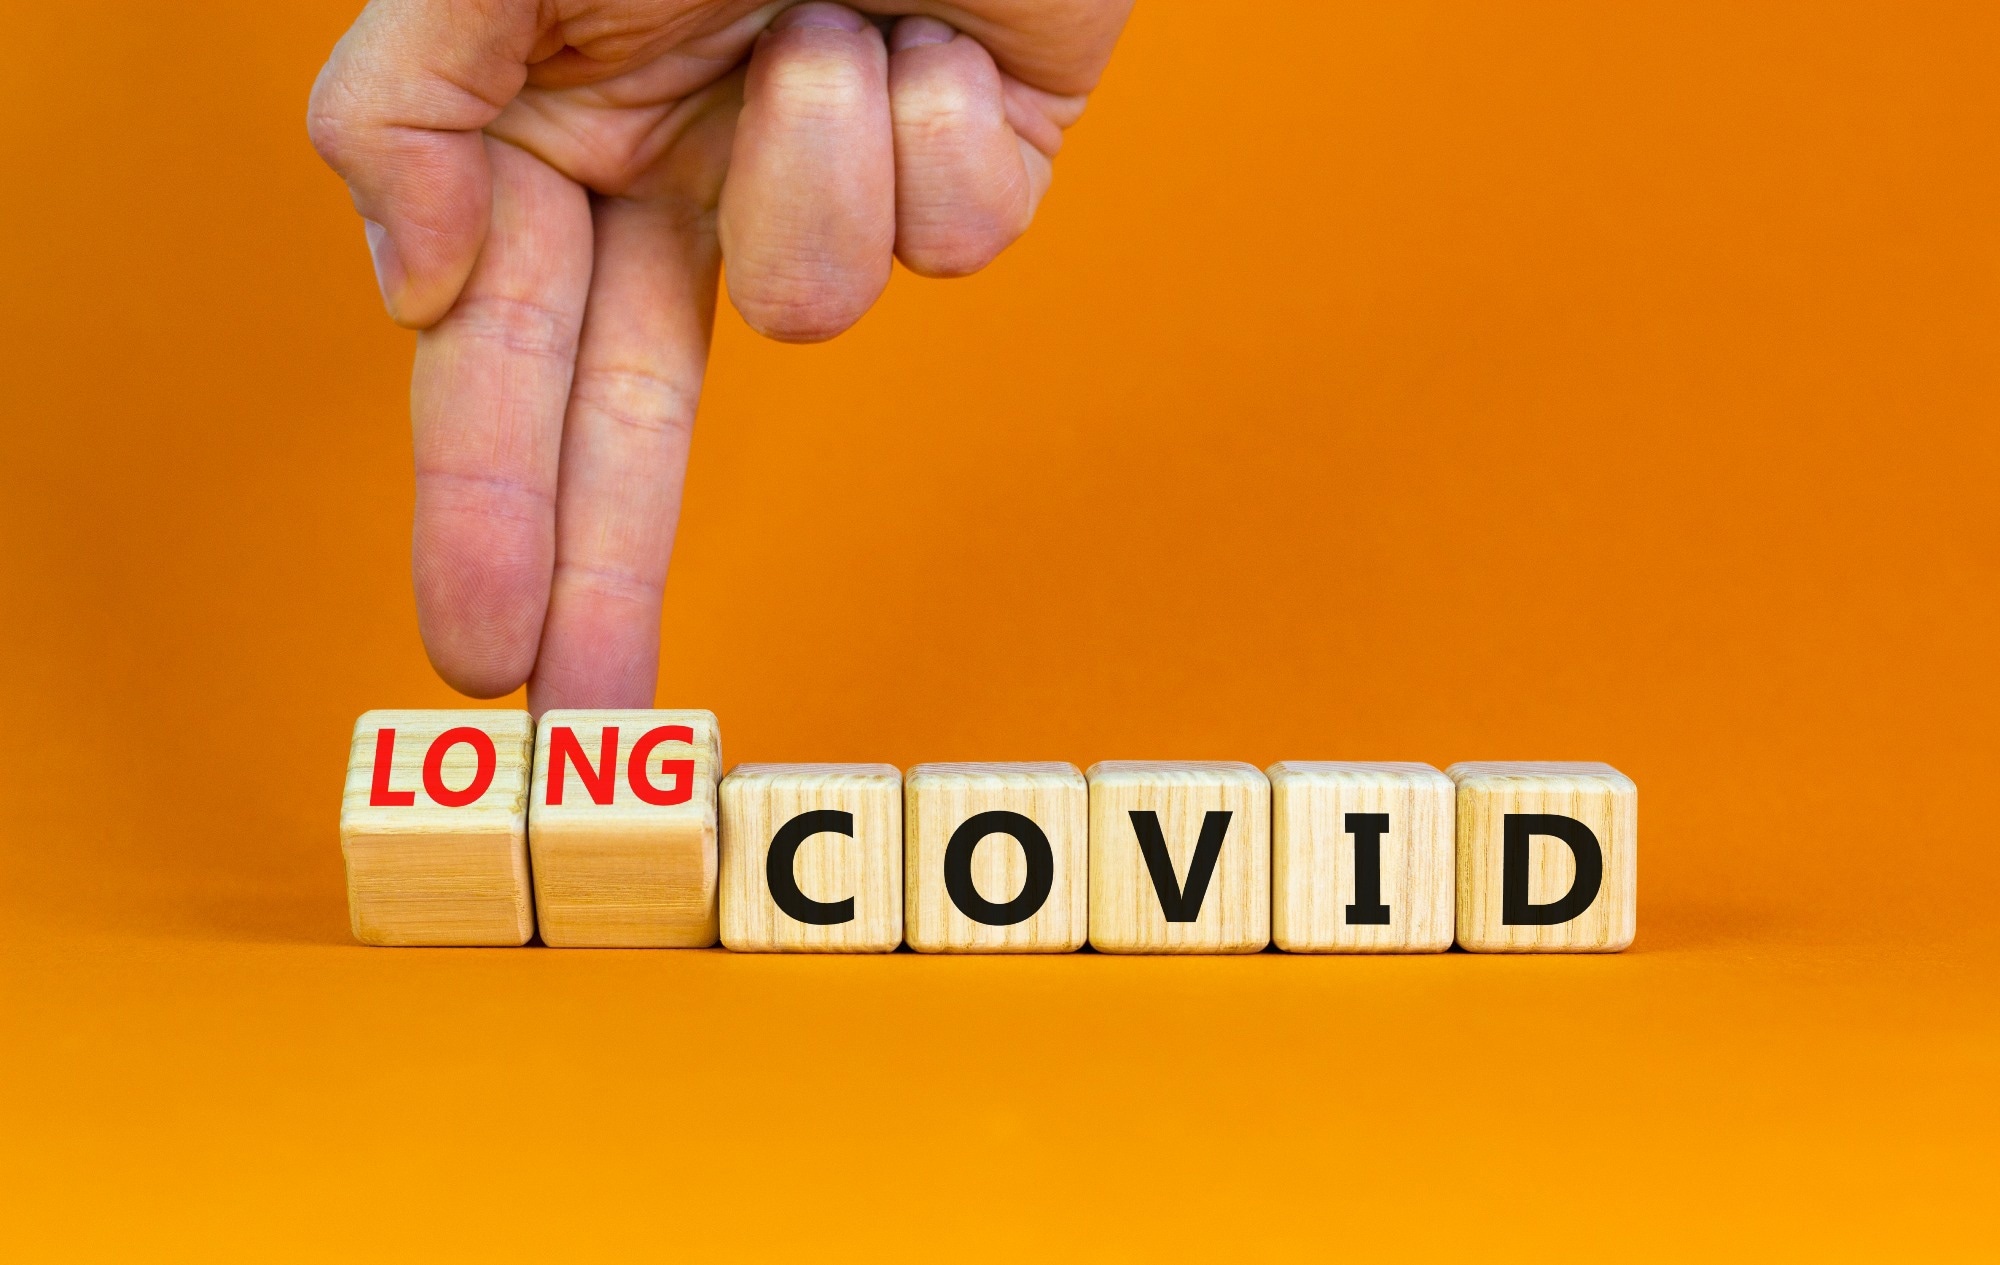 Study: The epidemiology of long COVID in US adults two years after the start of the US SARS-CoV-2 pandemic. Image Credit: Dmitry Demidovich / Shutterstock